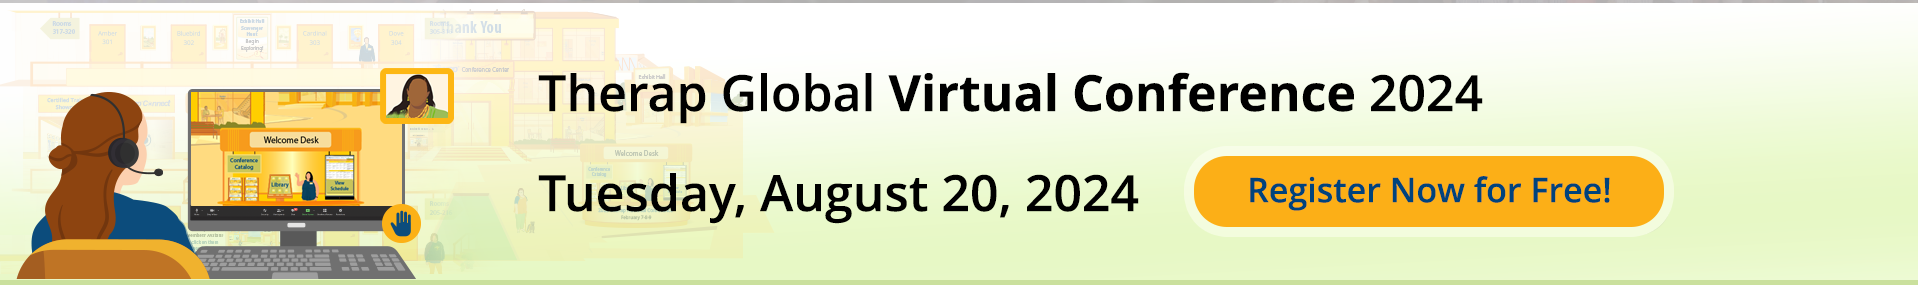 Register for Therap Global Virtual Conference 2024